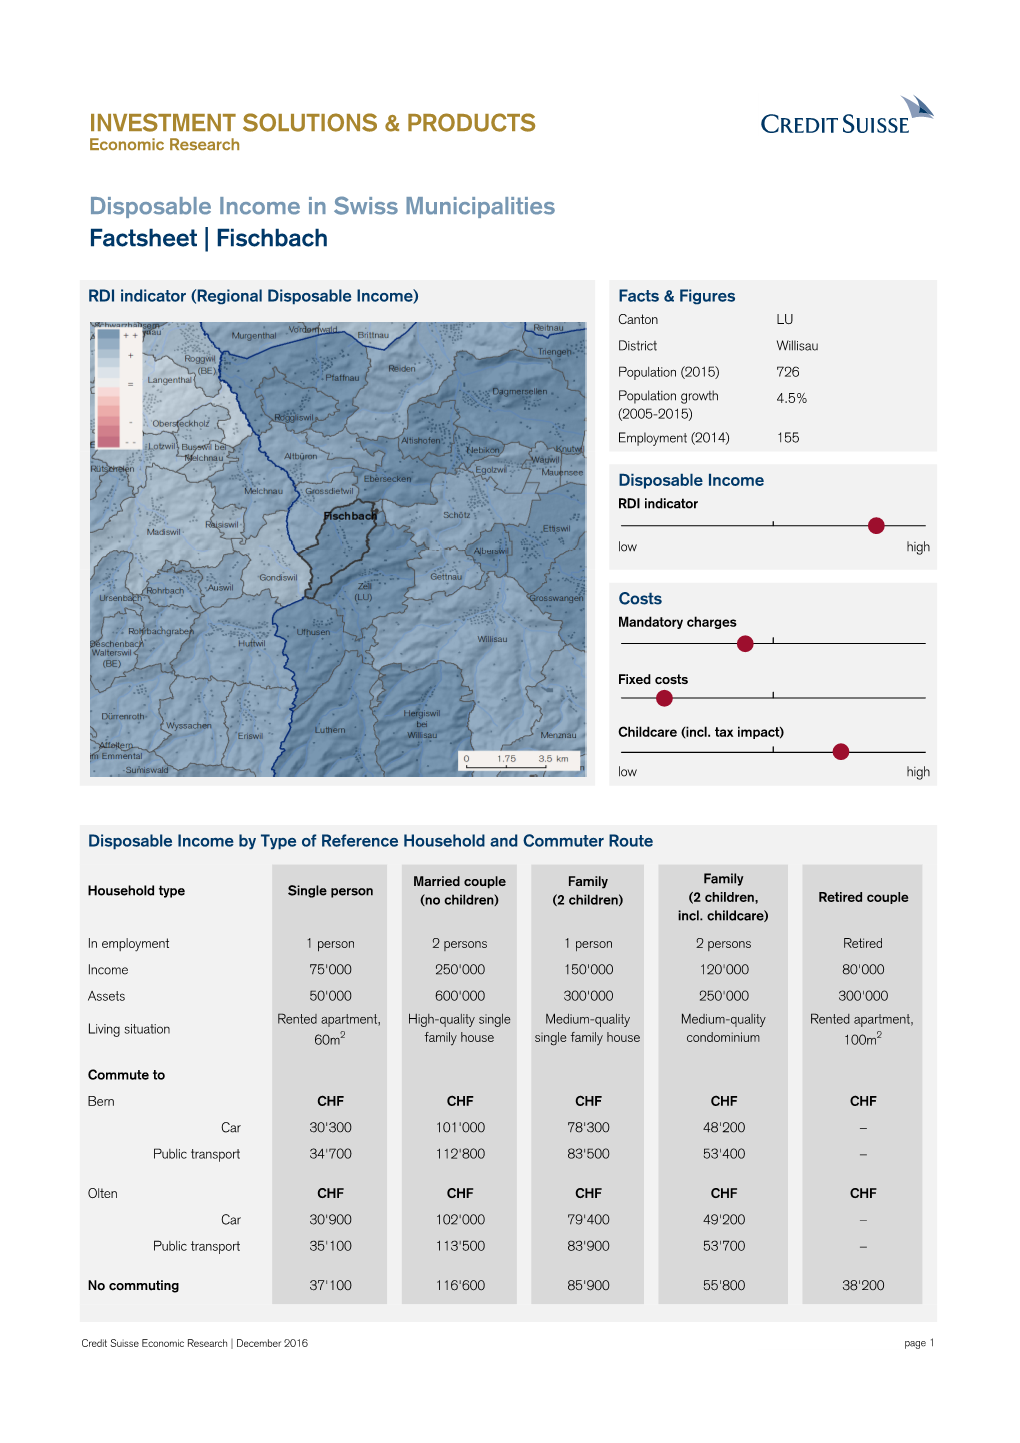 INVESTMENT SOLUTIONS & PRODUCTS Disposable Income in Swiss Municipalities Factsheet | Fischbach